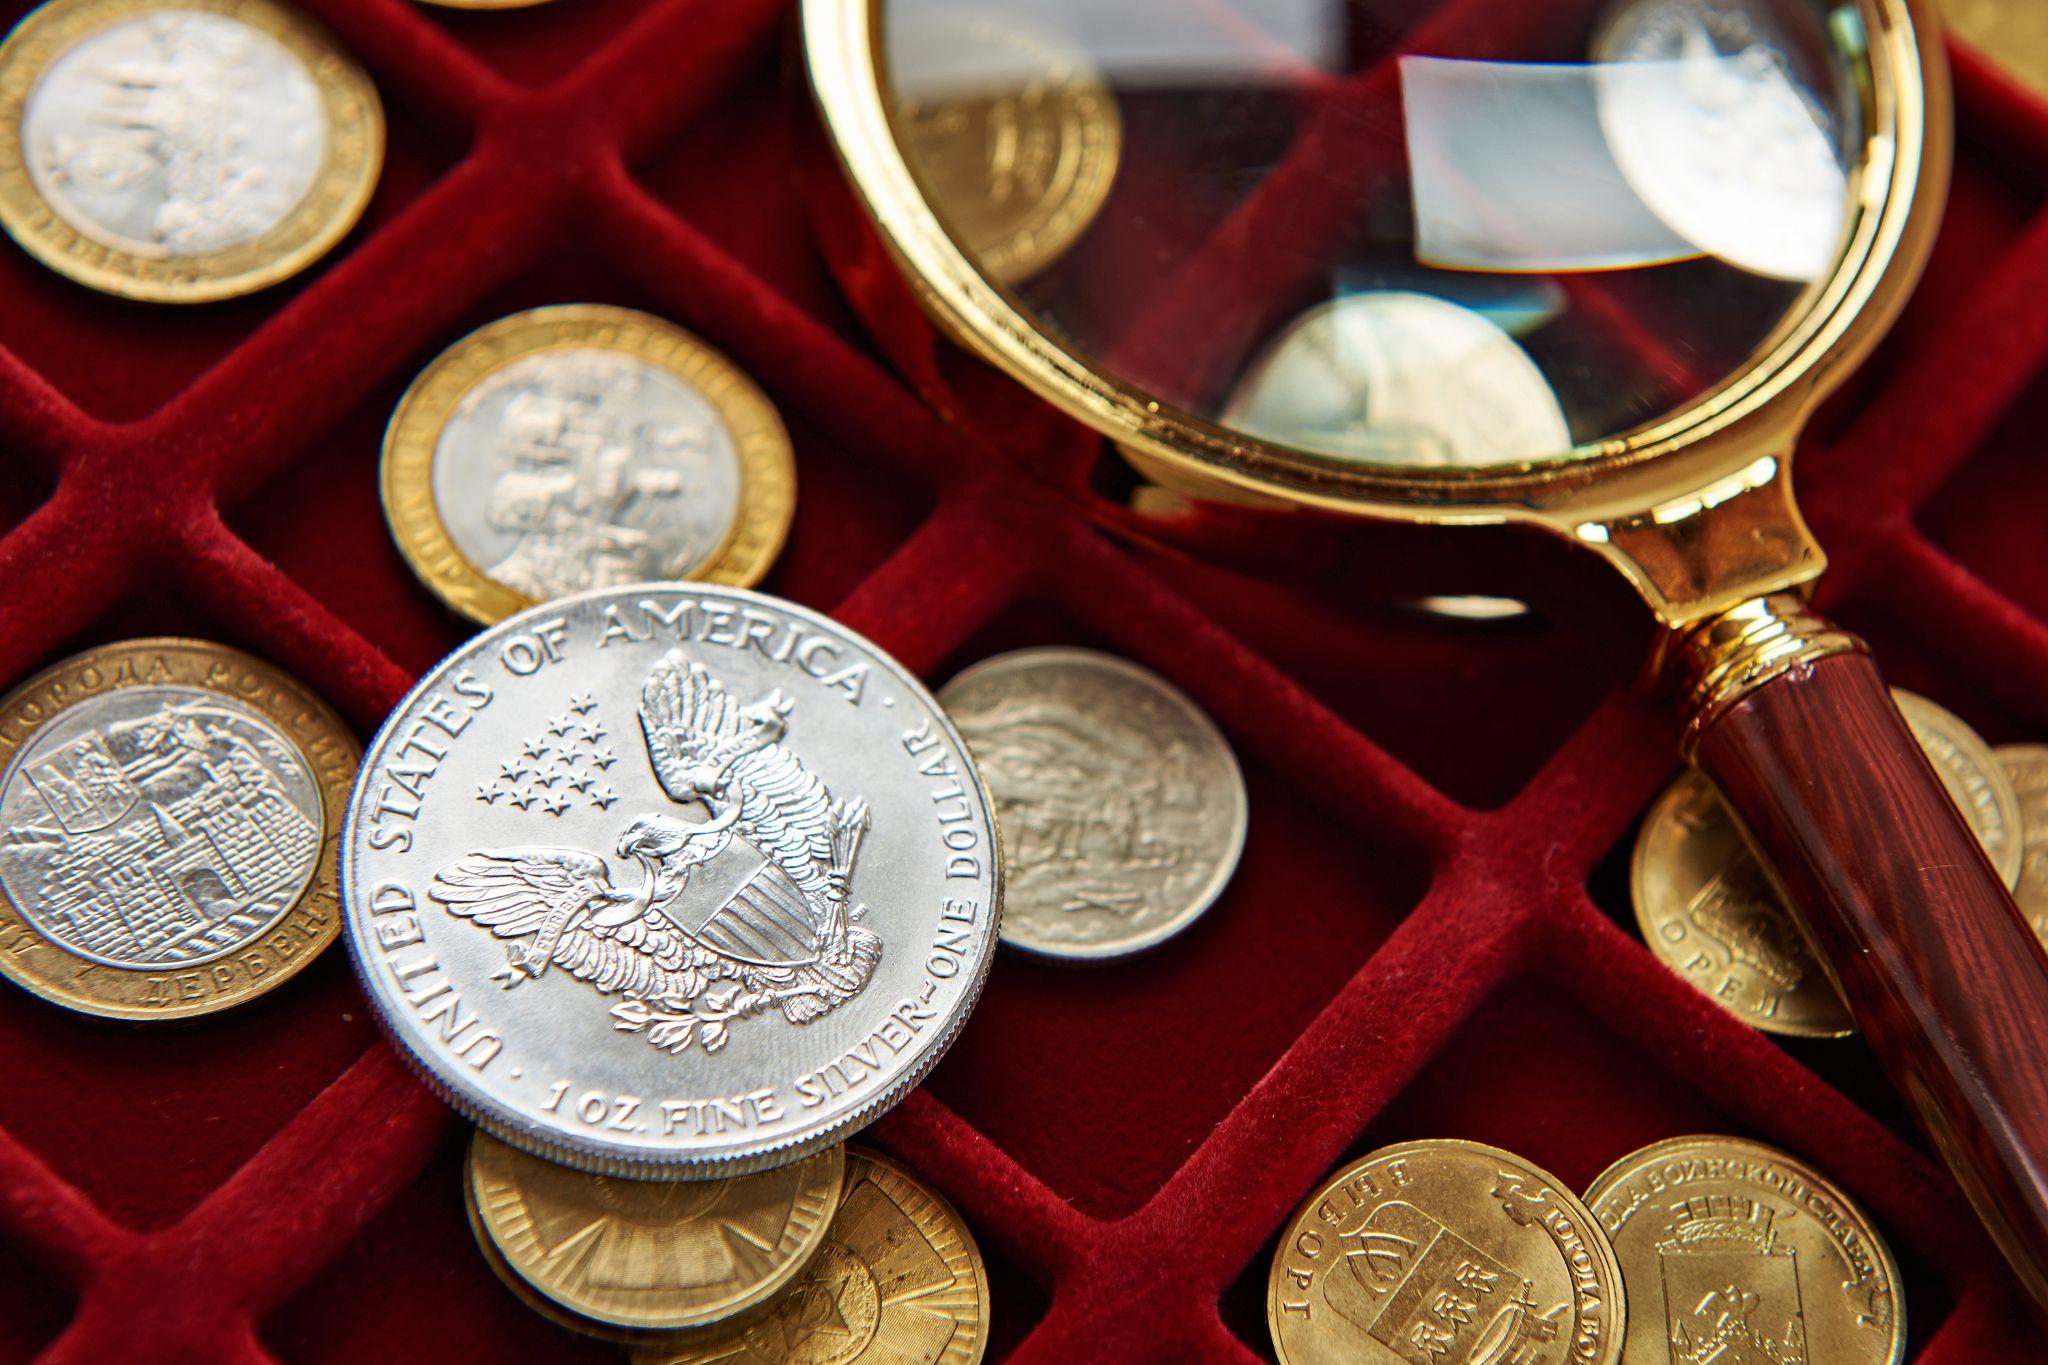 Collectible coins in a red velvet organization box.